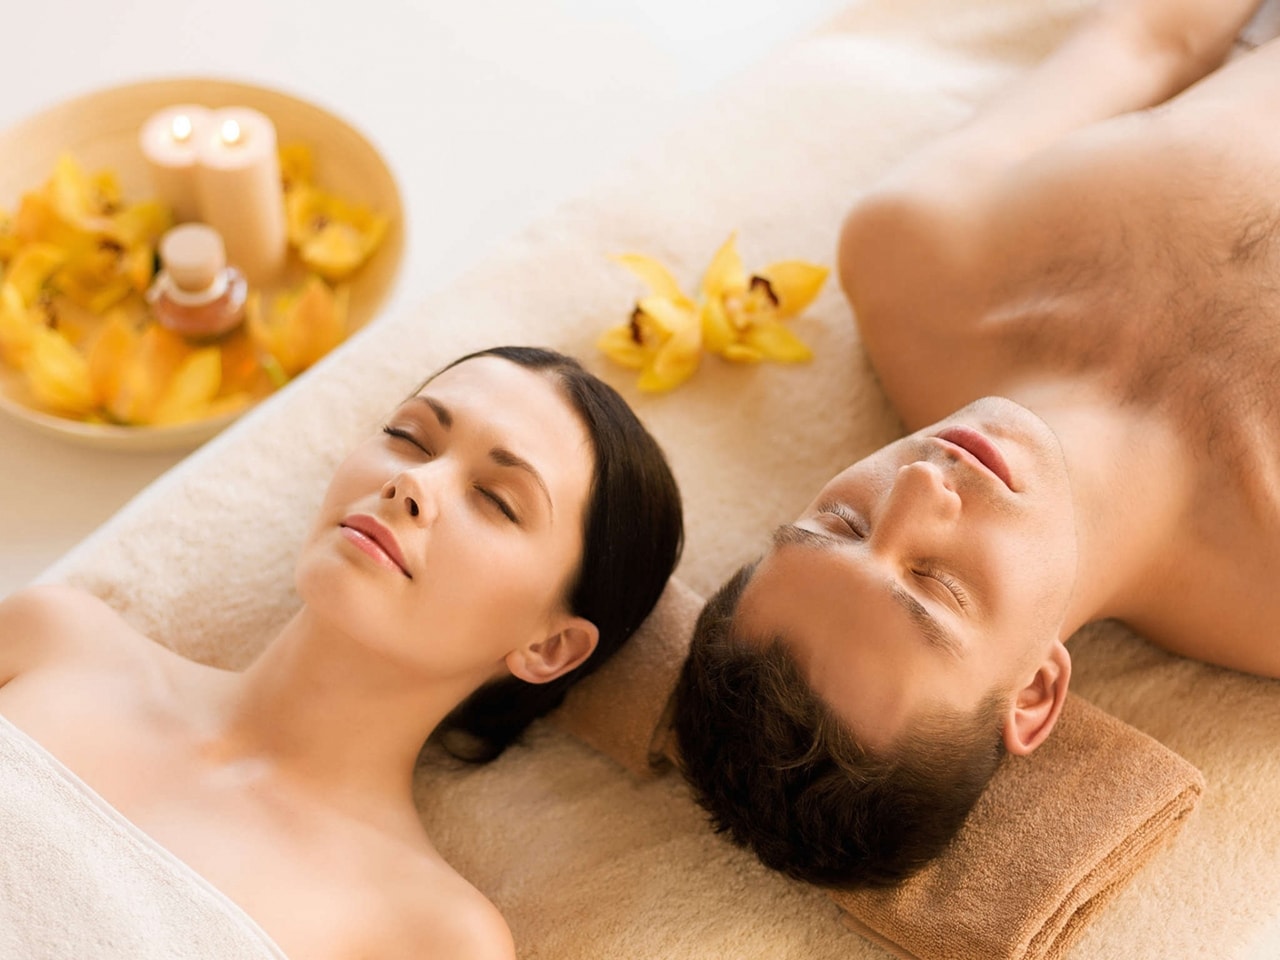 Couples Turkish Bath Experience in Paris at Charme d'Orient Spa